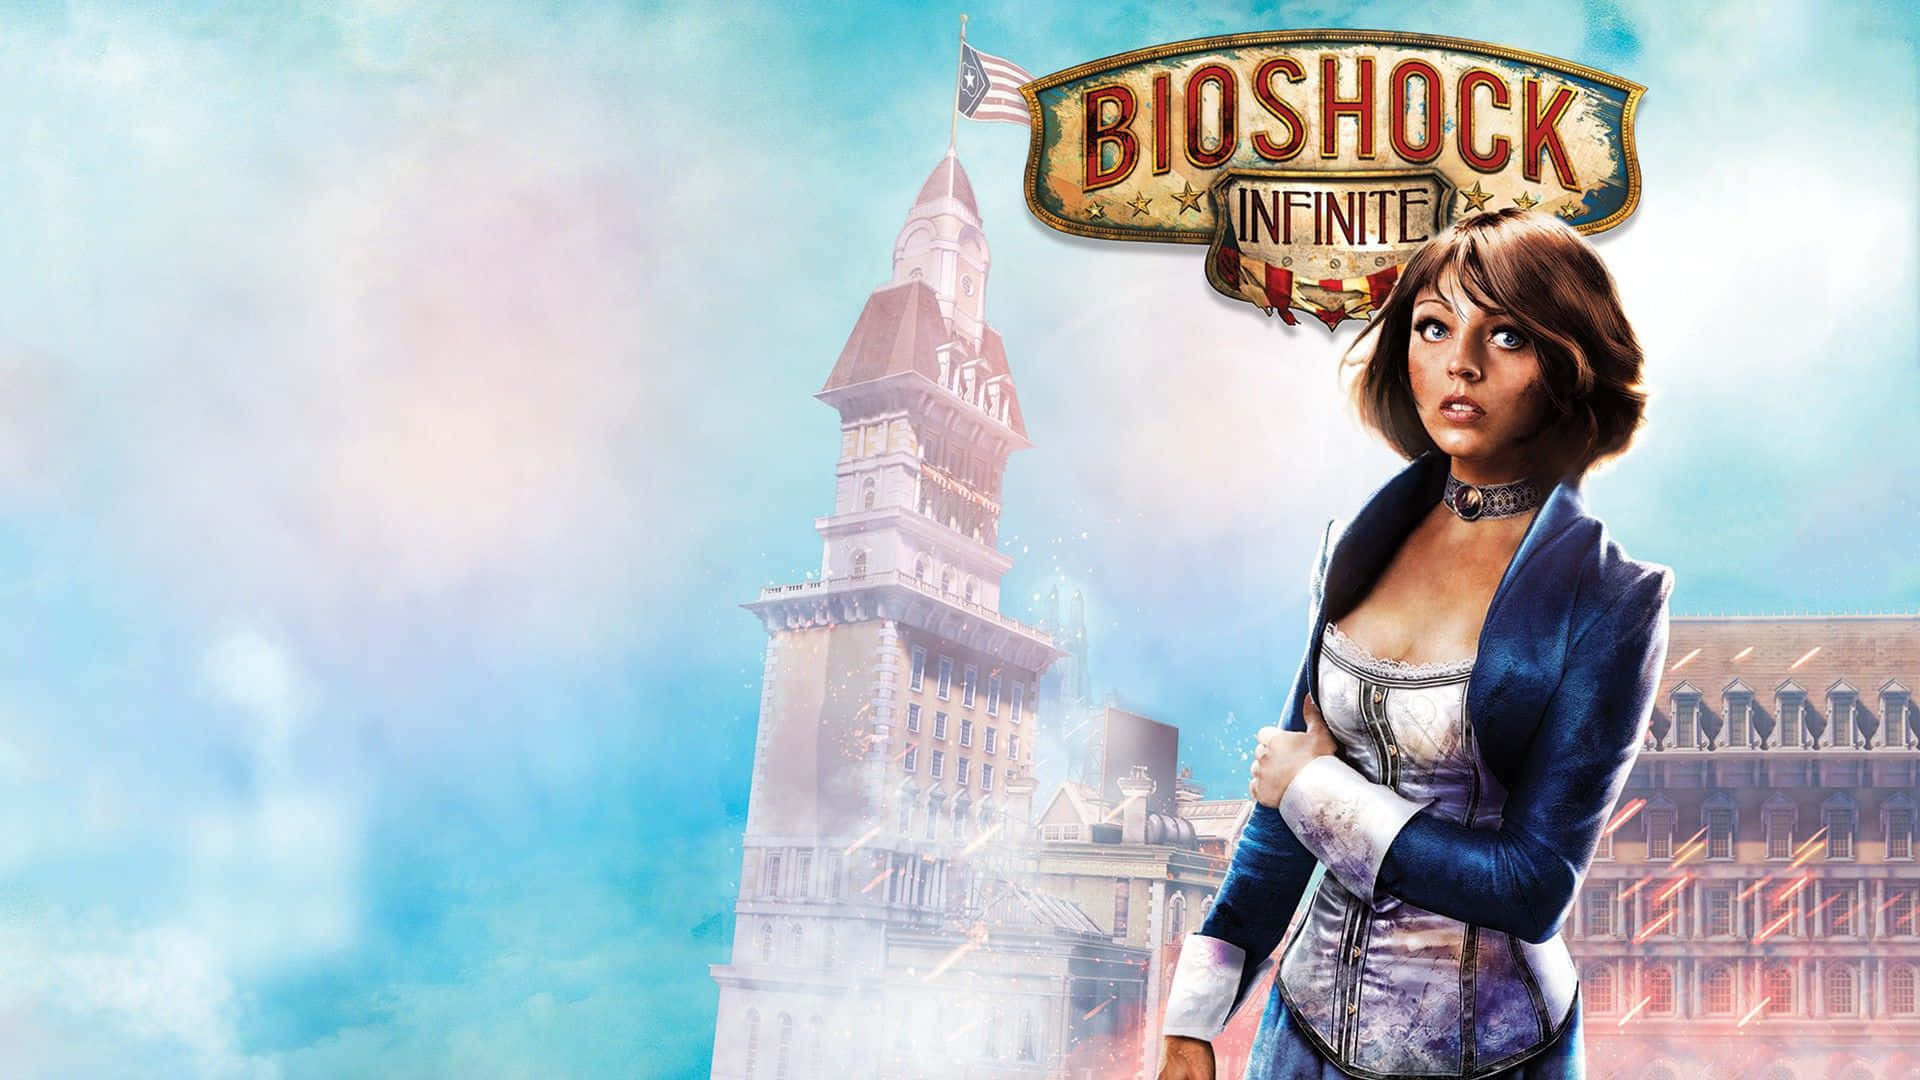 Feel the full power of Columbia as you explore the world of Bioshock Infinite.